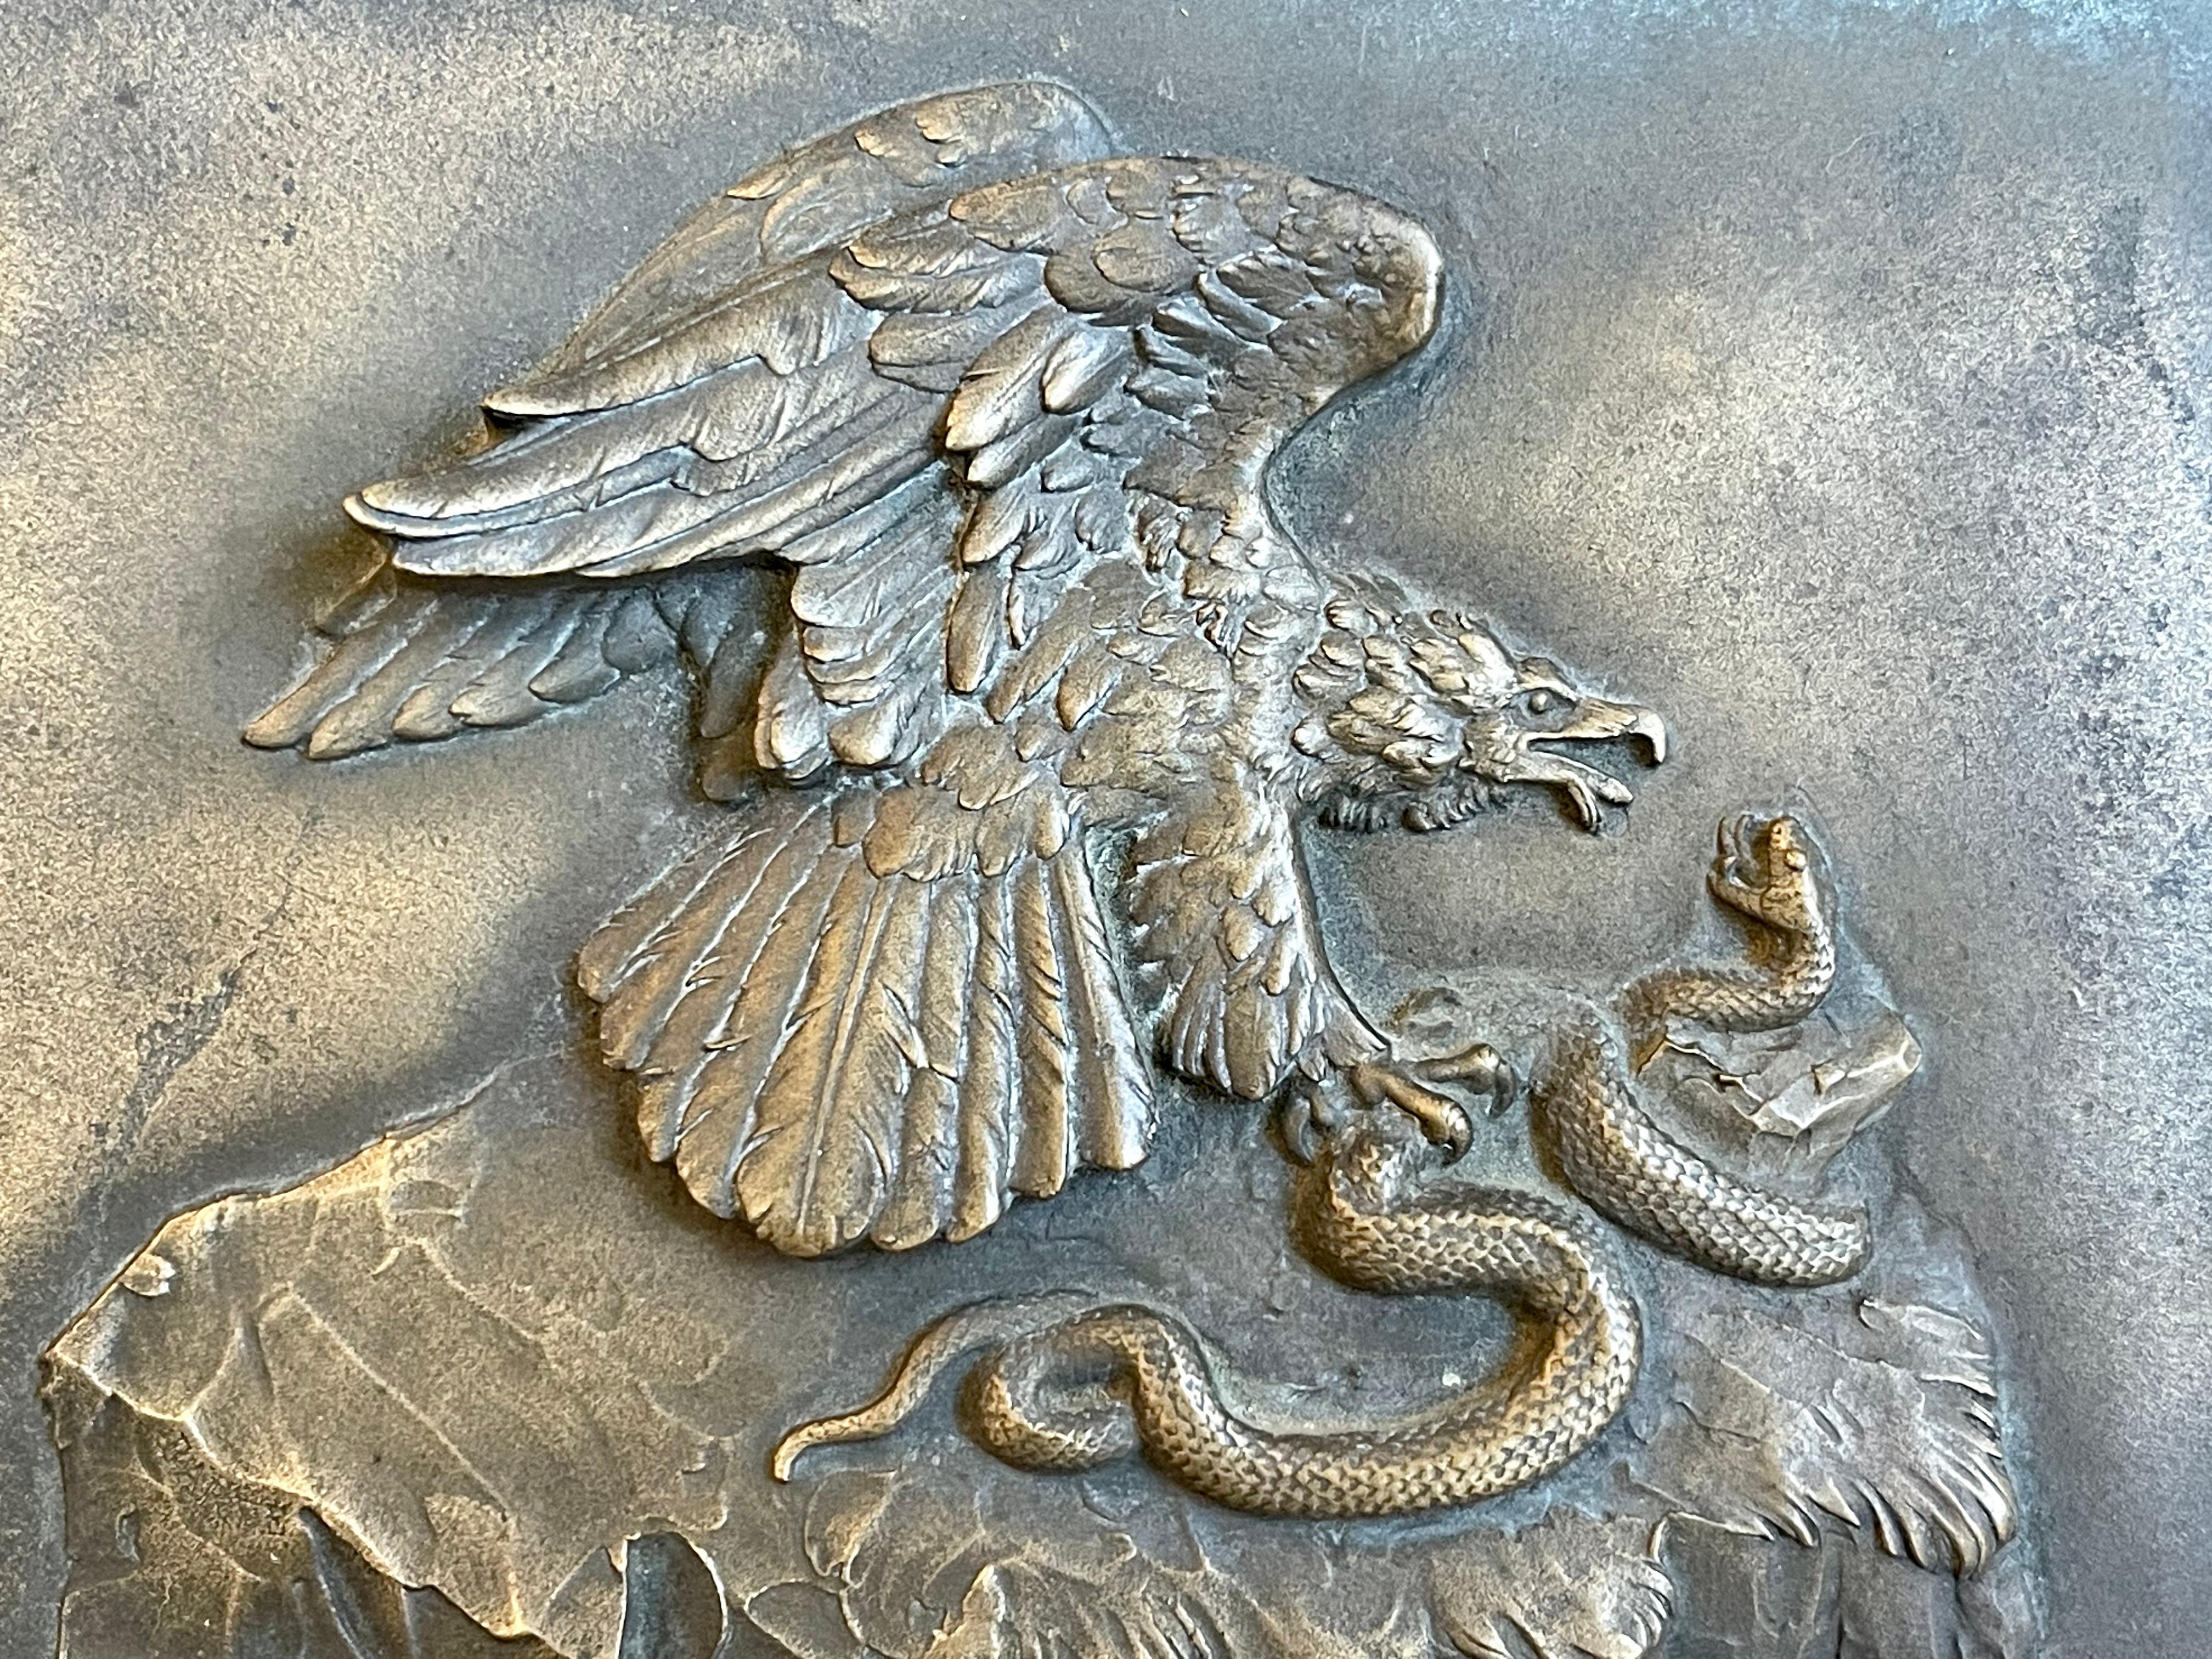 Bronze bas relief representing a golden eagle attacking a snake. Signed on the Rock 